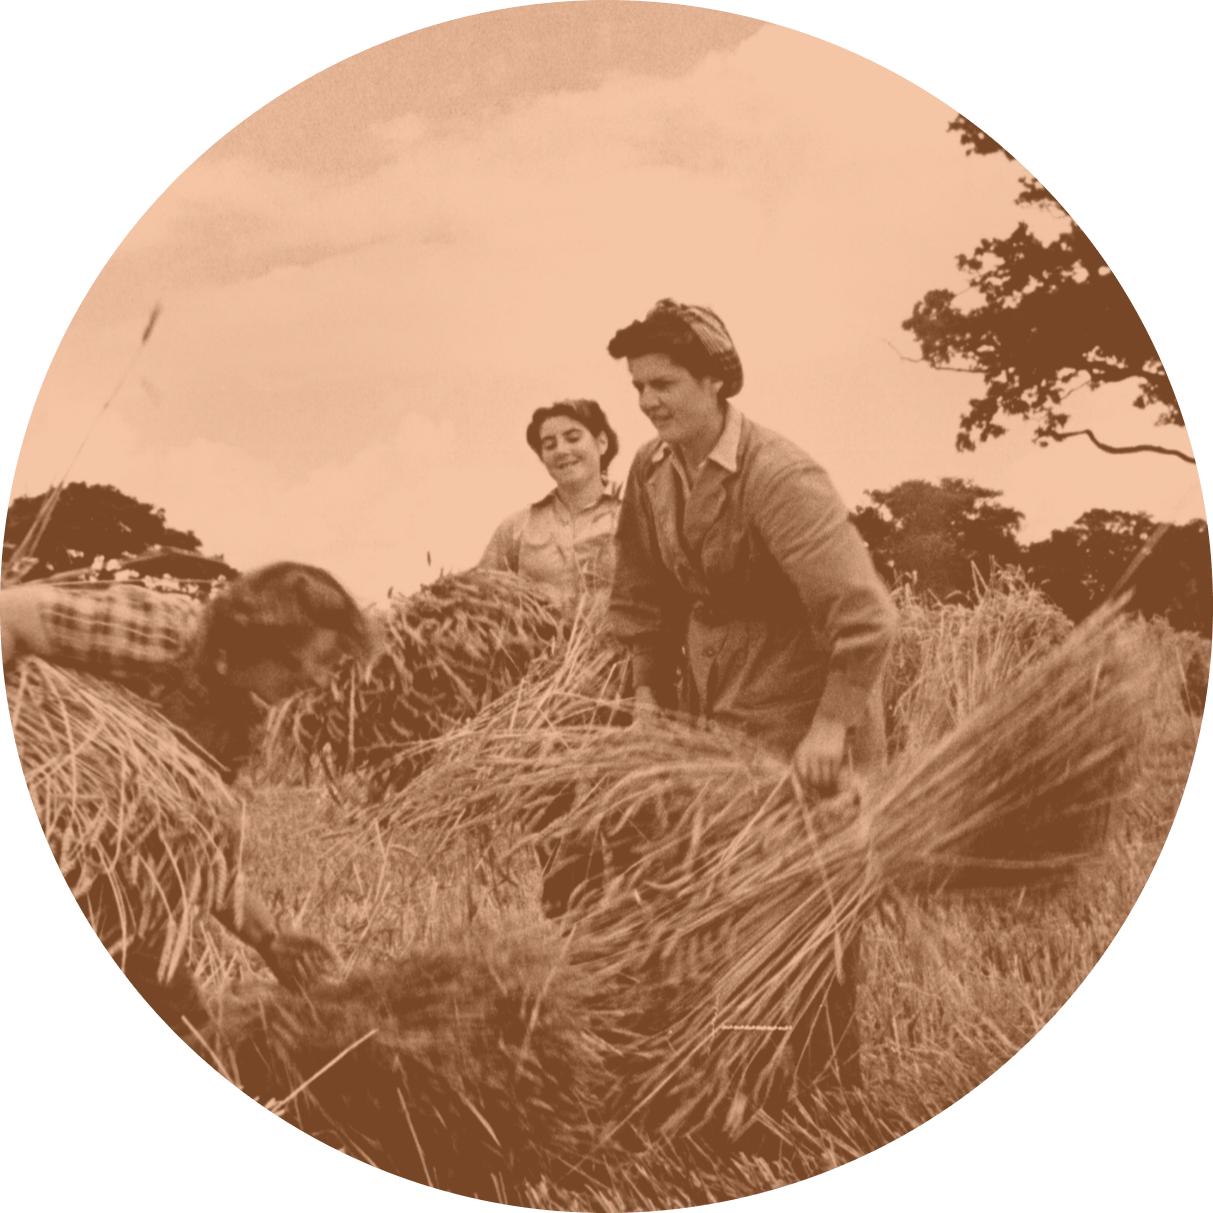 Women helping with the harvest during rationing